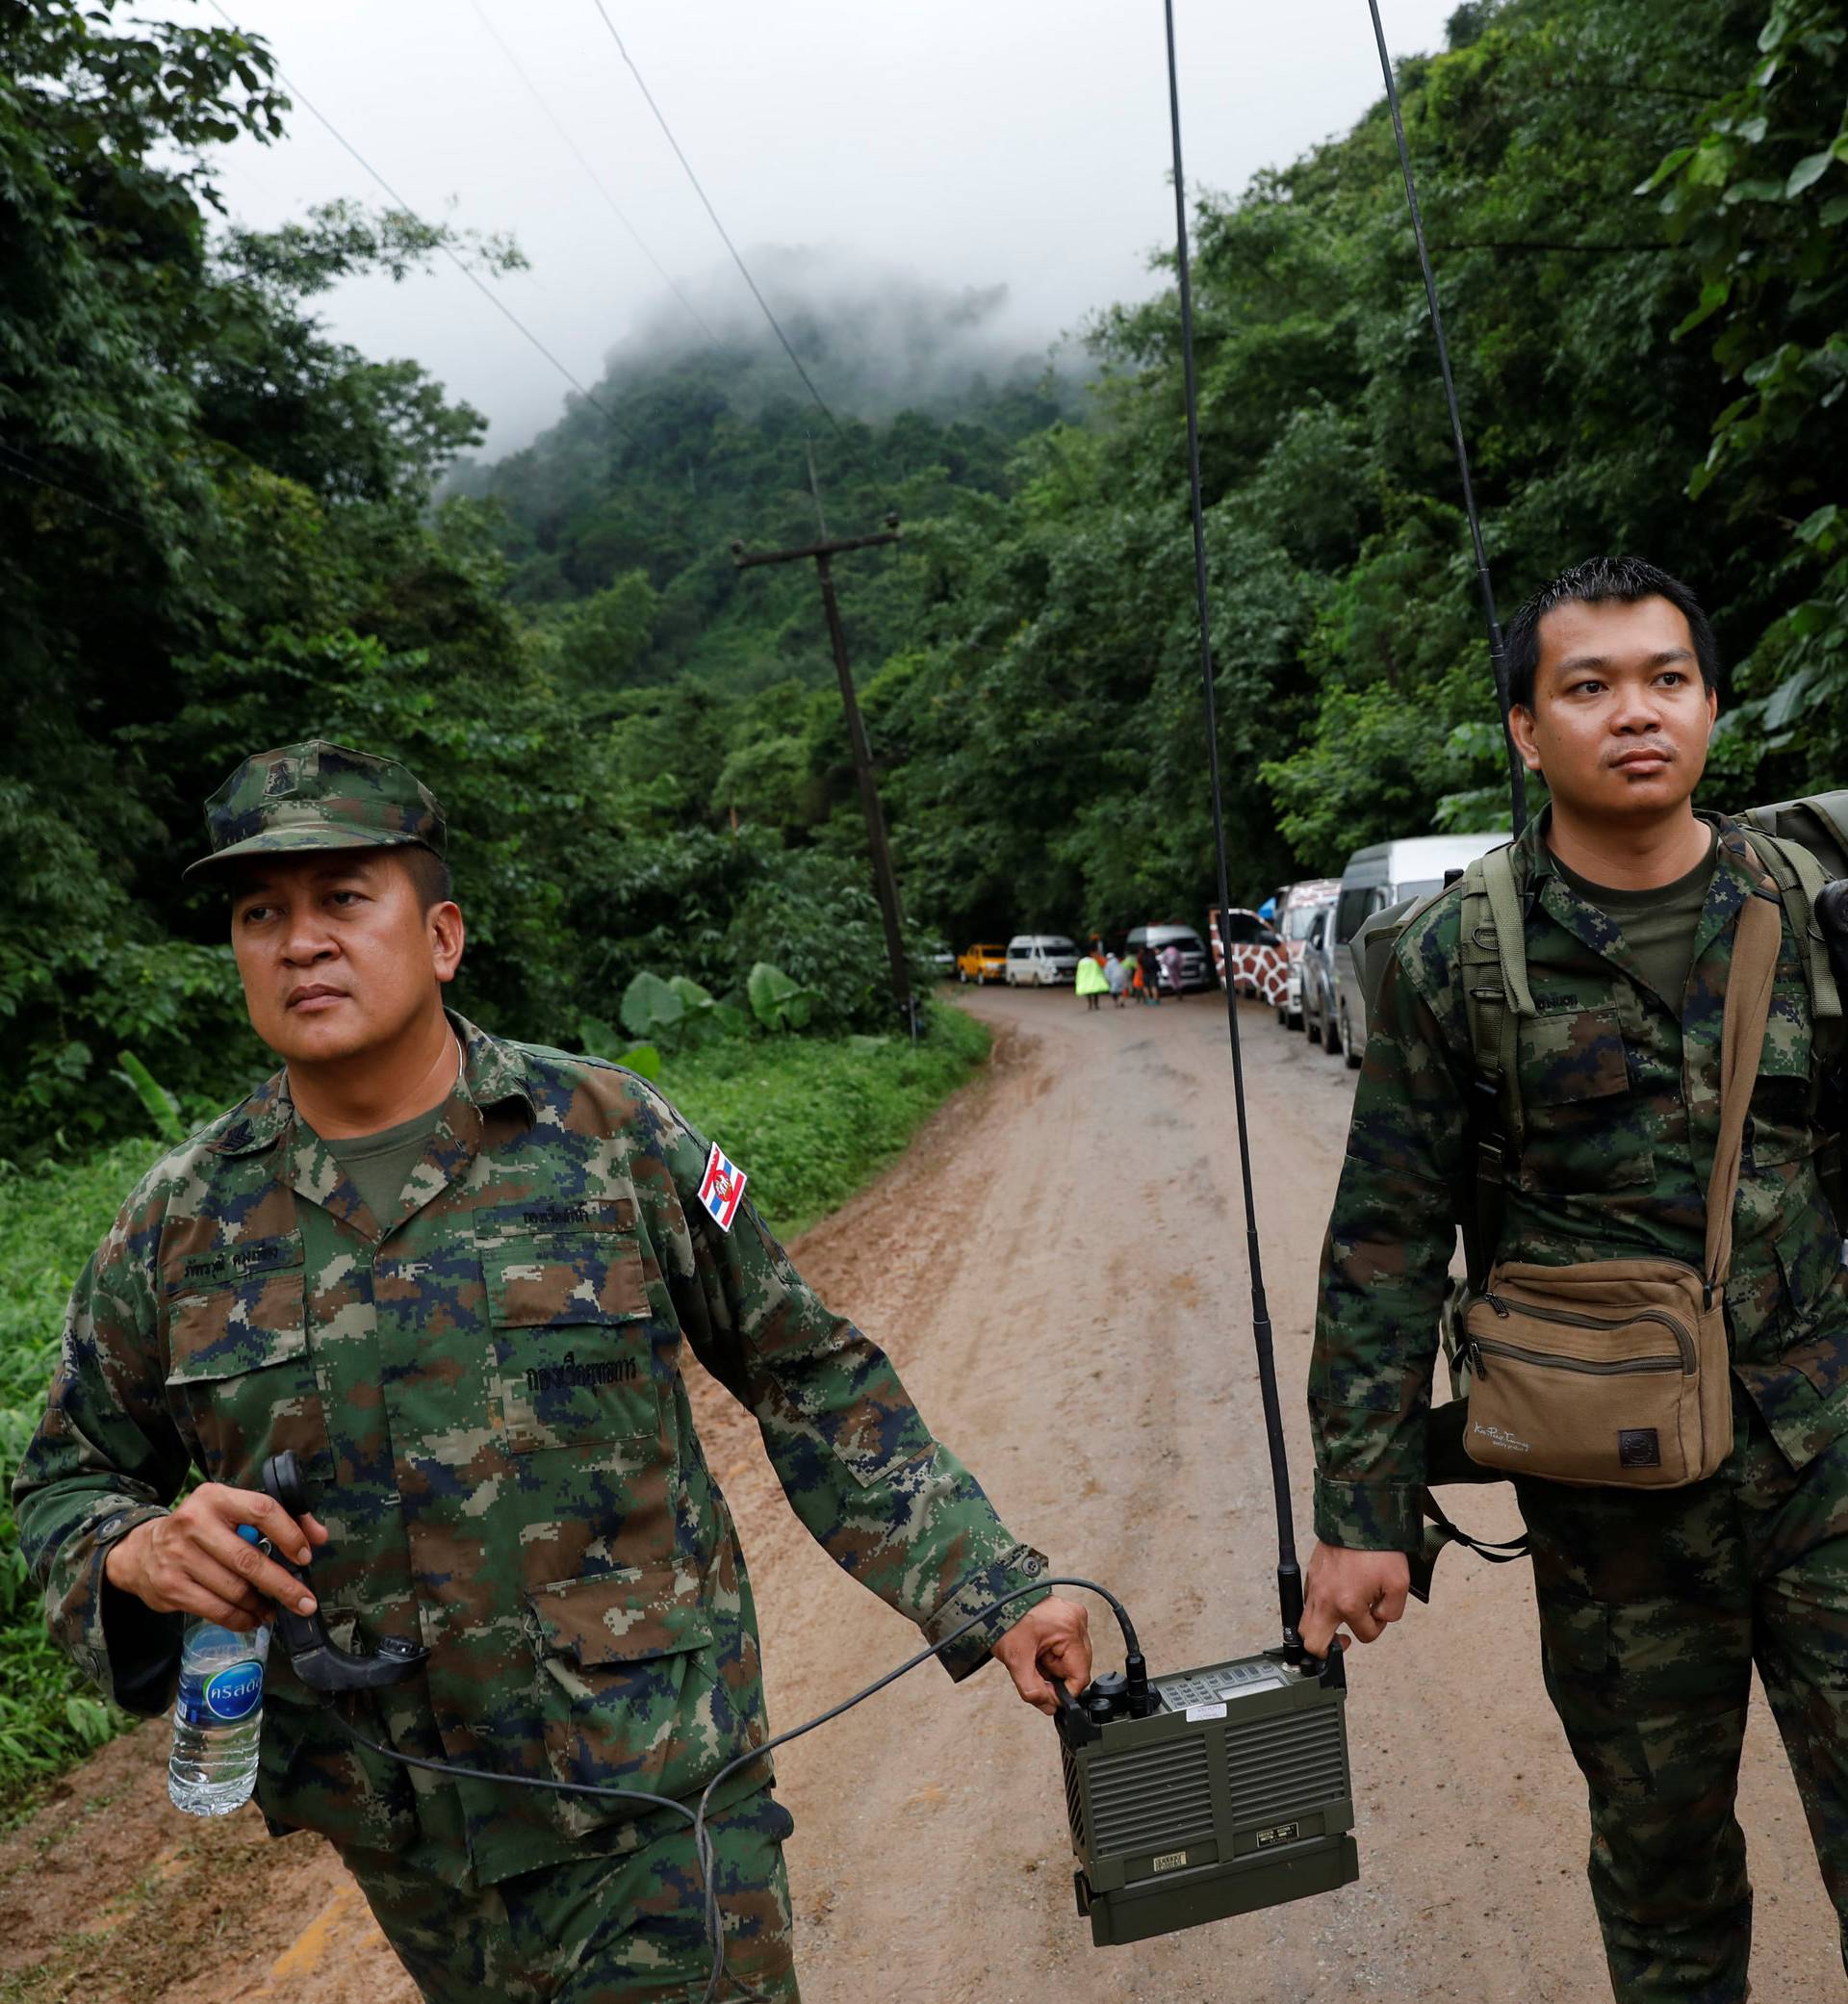 Soldiers carry a radio near Tham Luang cave complex during a search for members of an under-16 soccer team and their coach, in the northern province of Chiang Rai